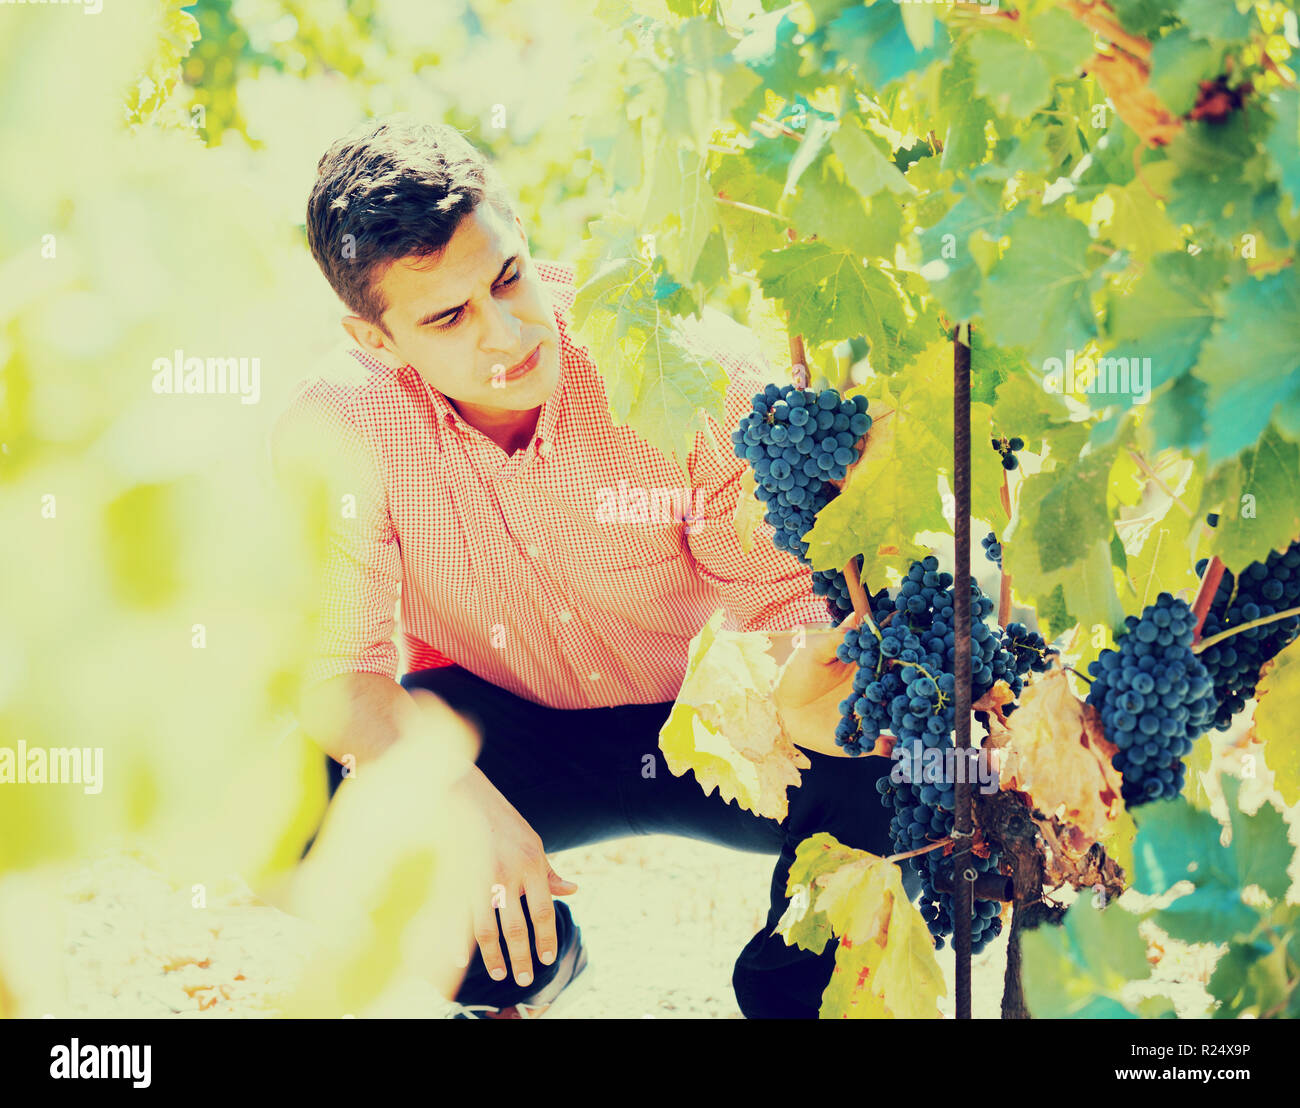 male vineyard worker cutting clusters of wine grape Stock Photo